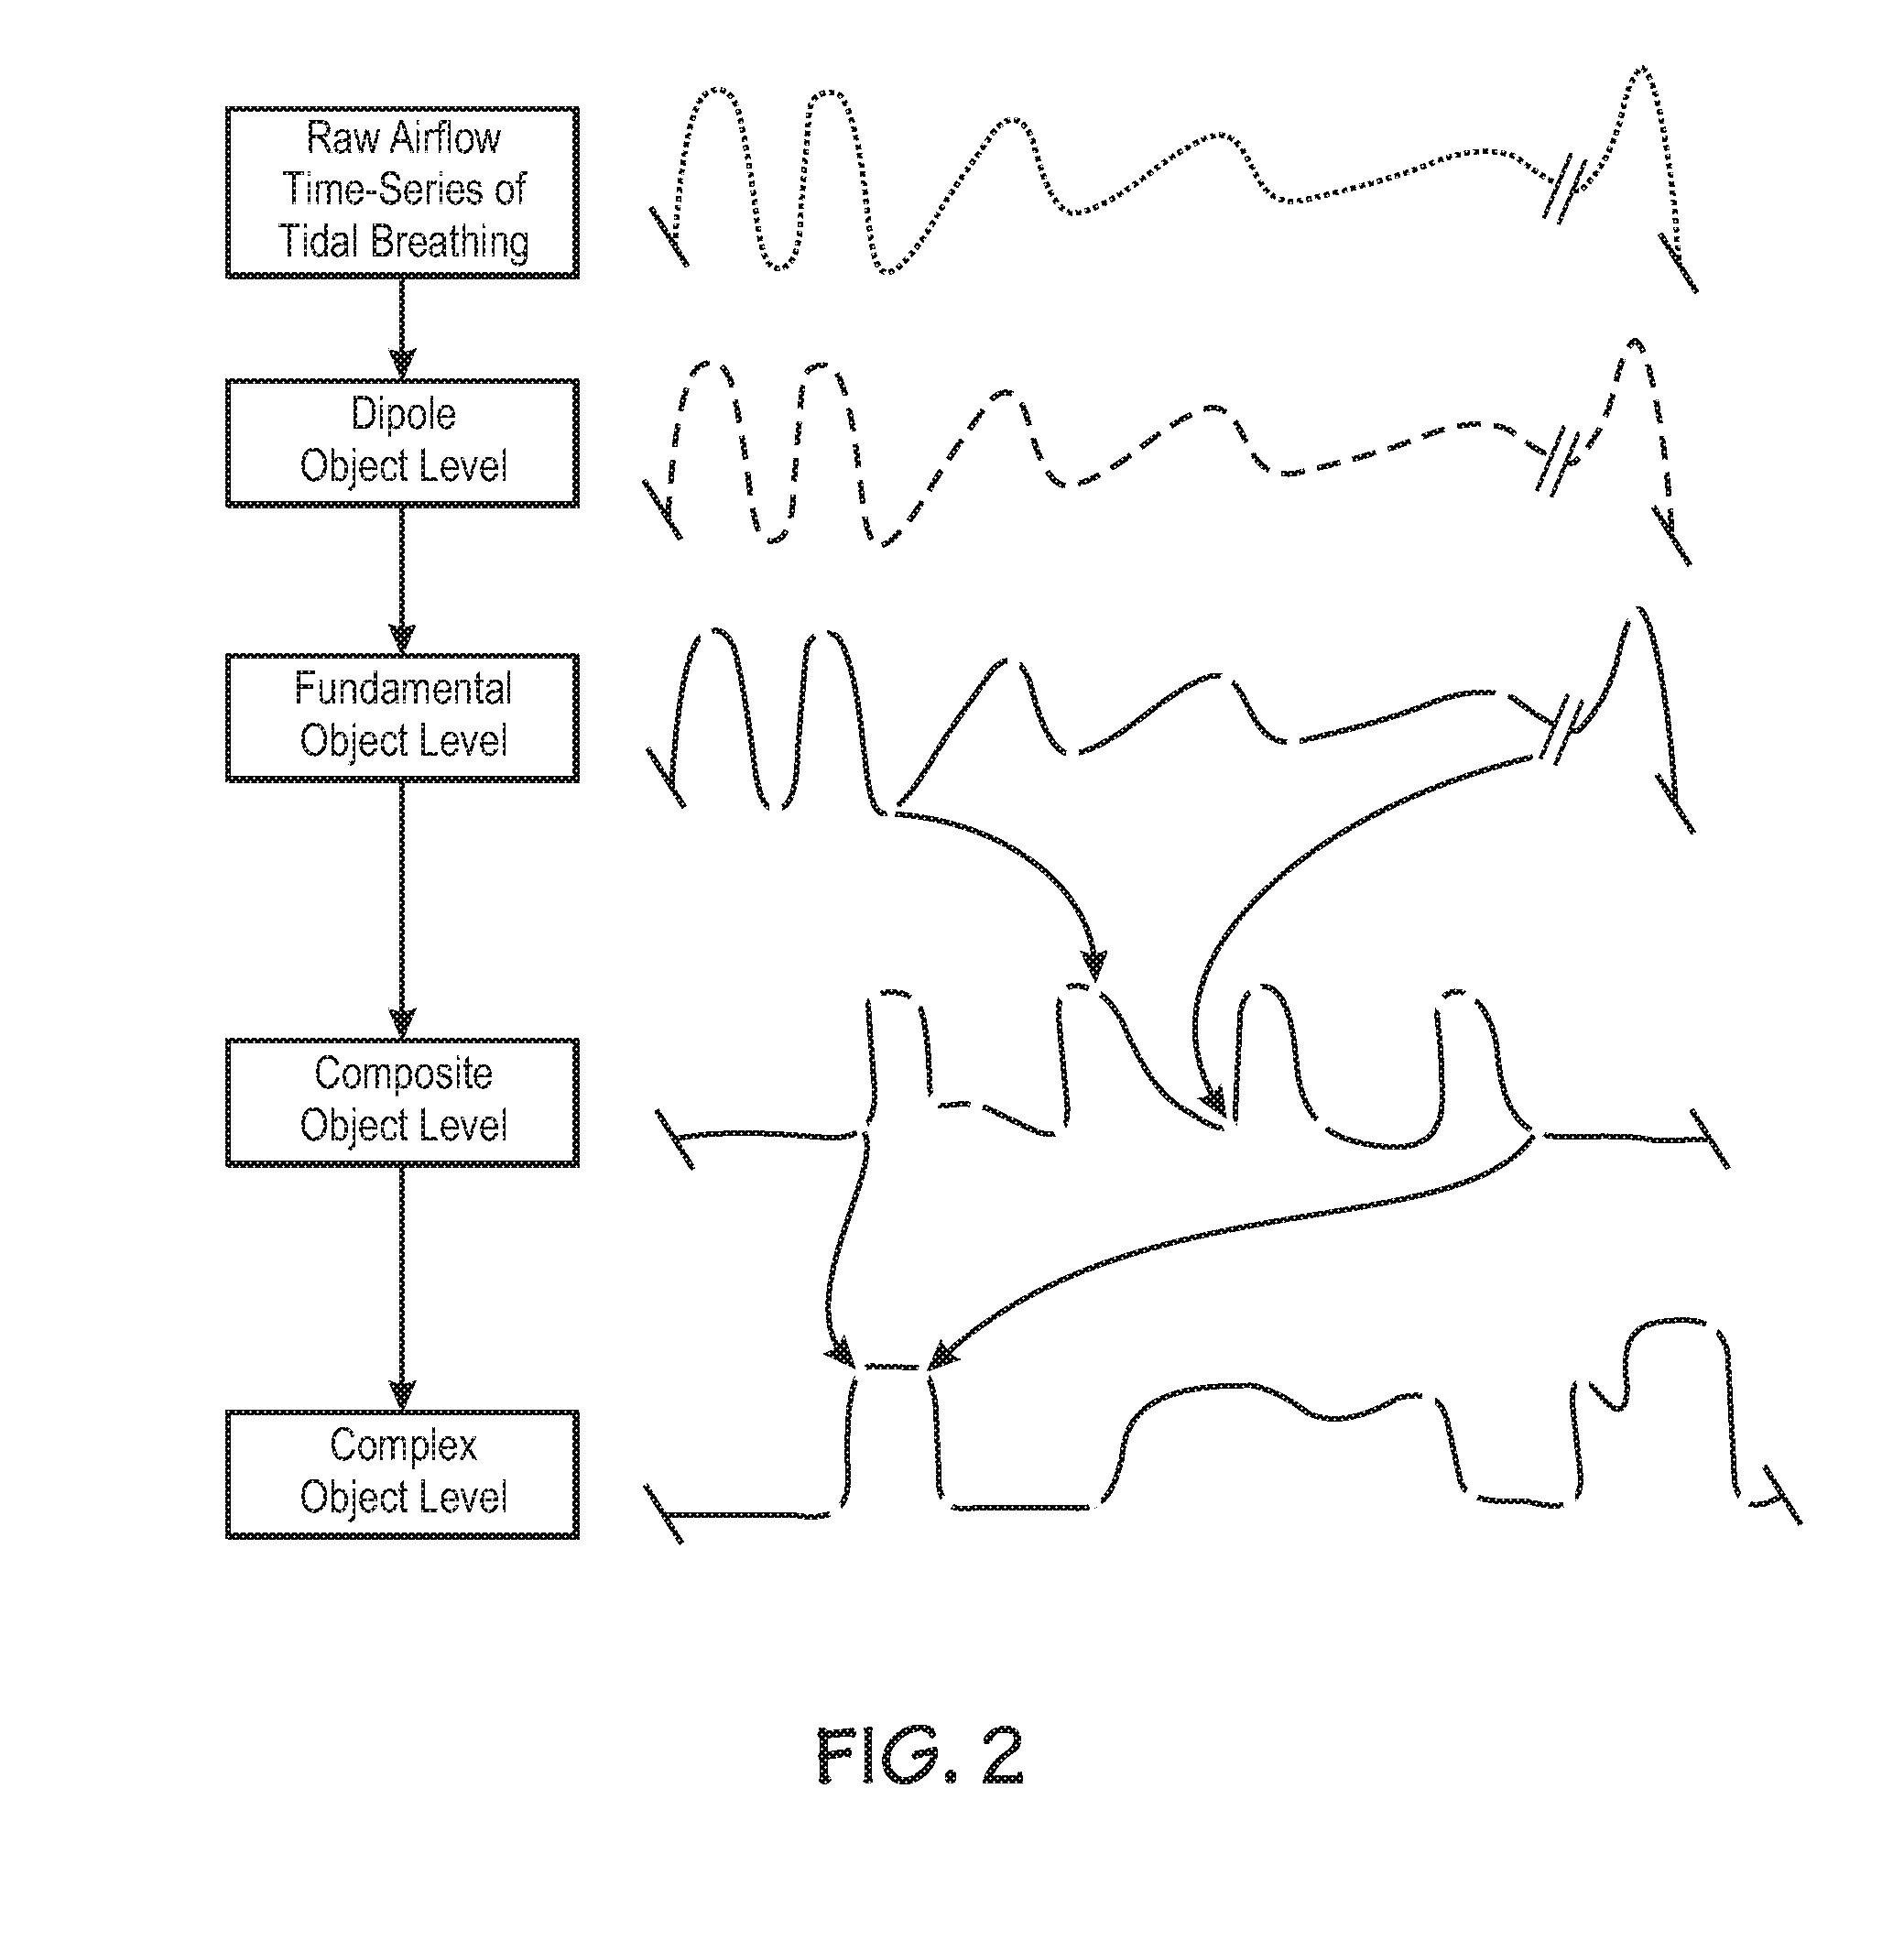 Centralized hospital monitoring system for automatically detecting upper airway instability and for preventing and aborting adverse drug reactions